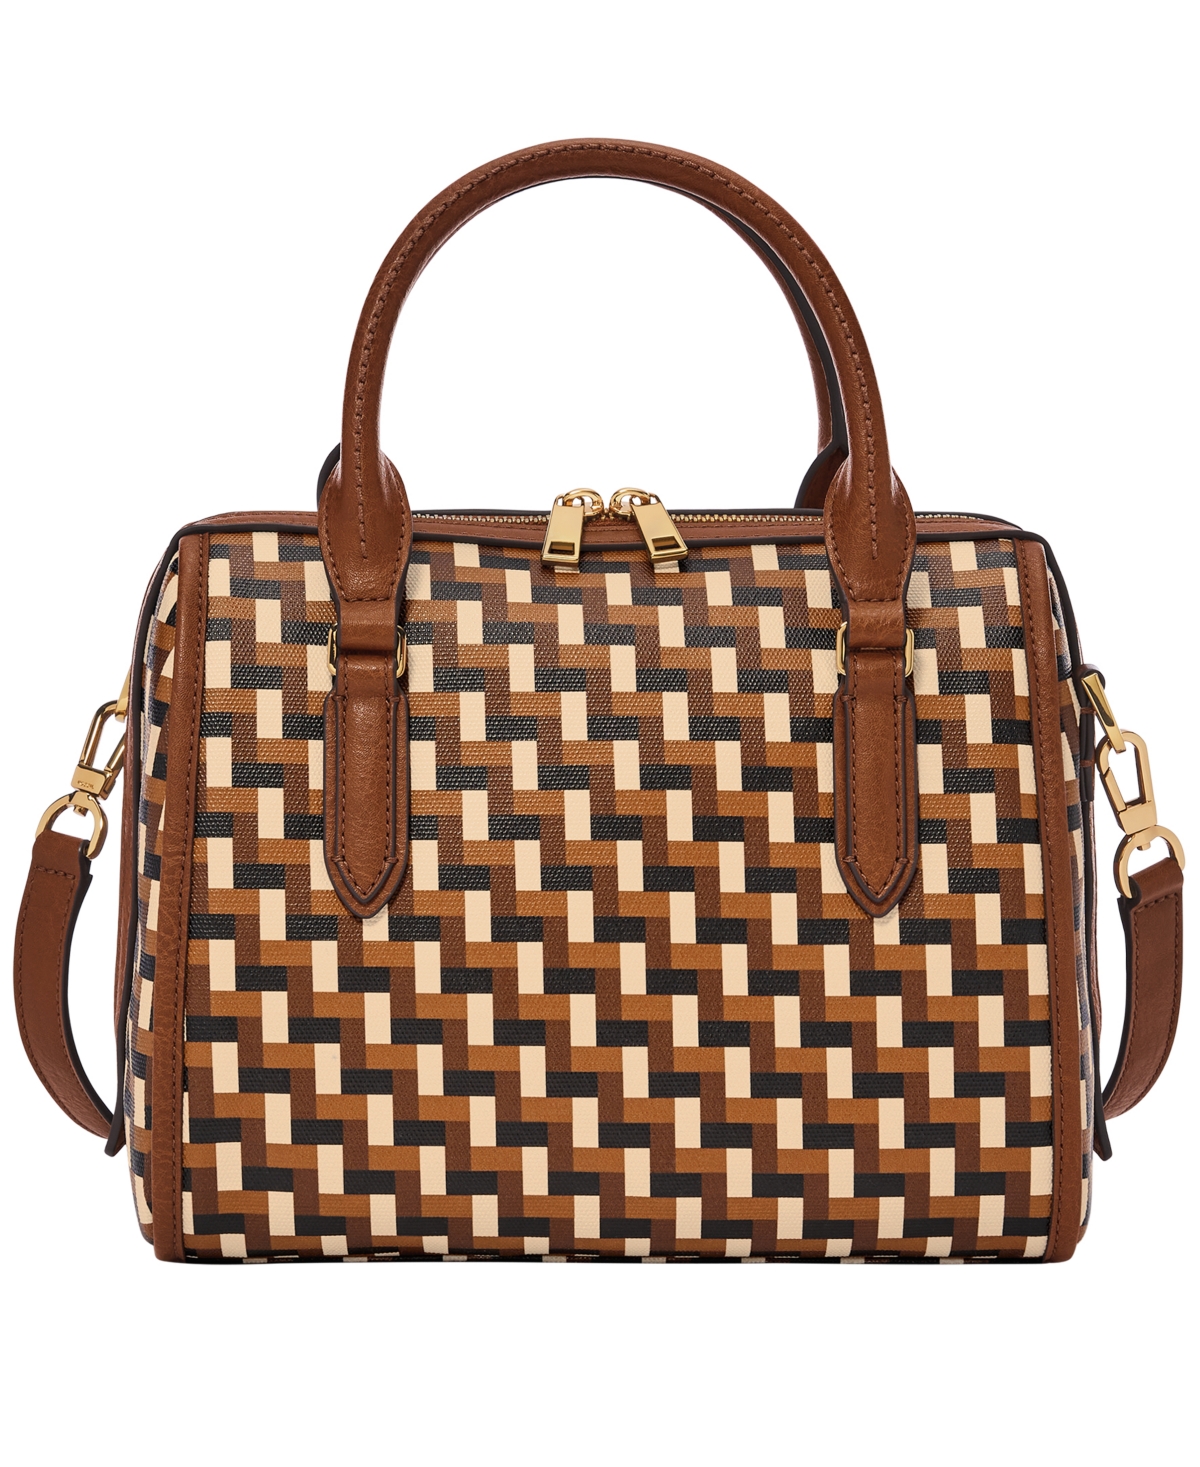 Fossil Williamson Satchel Bag In Woven Neutral Print